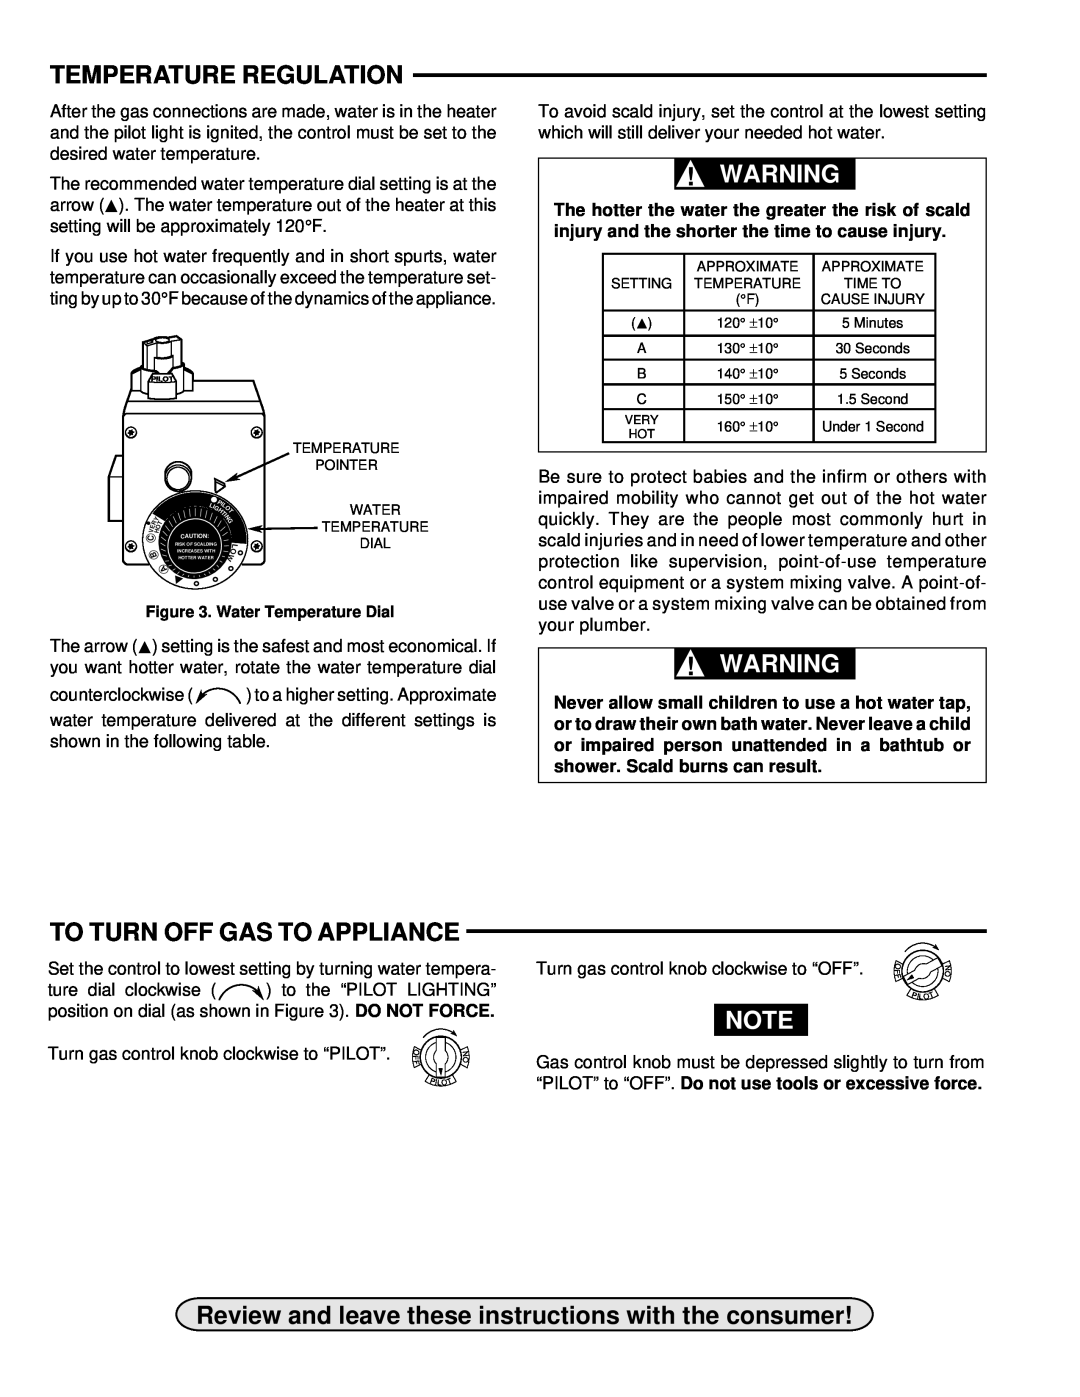 White Rodgers 37C73U installation instructions Temperature Regulation, To Turn Off Gas To Appliance 